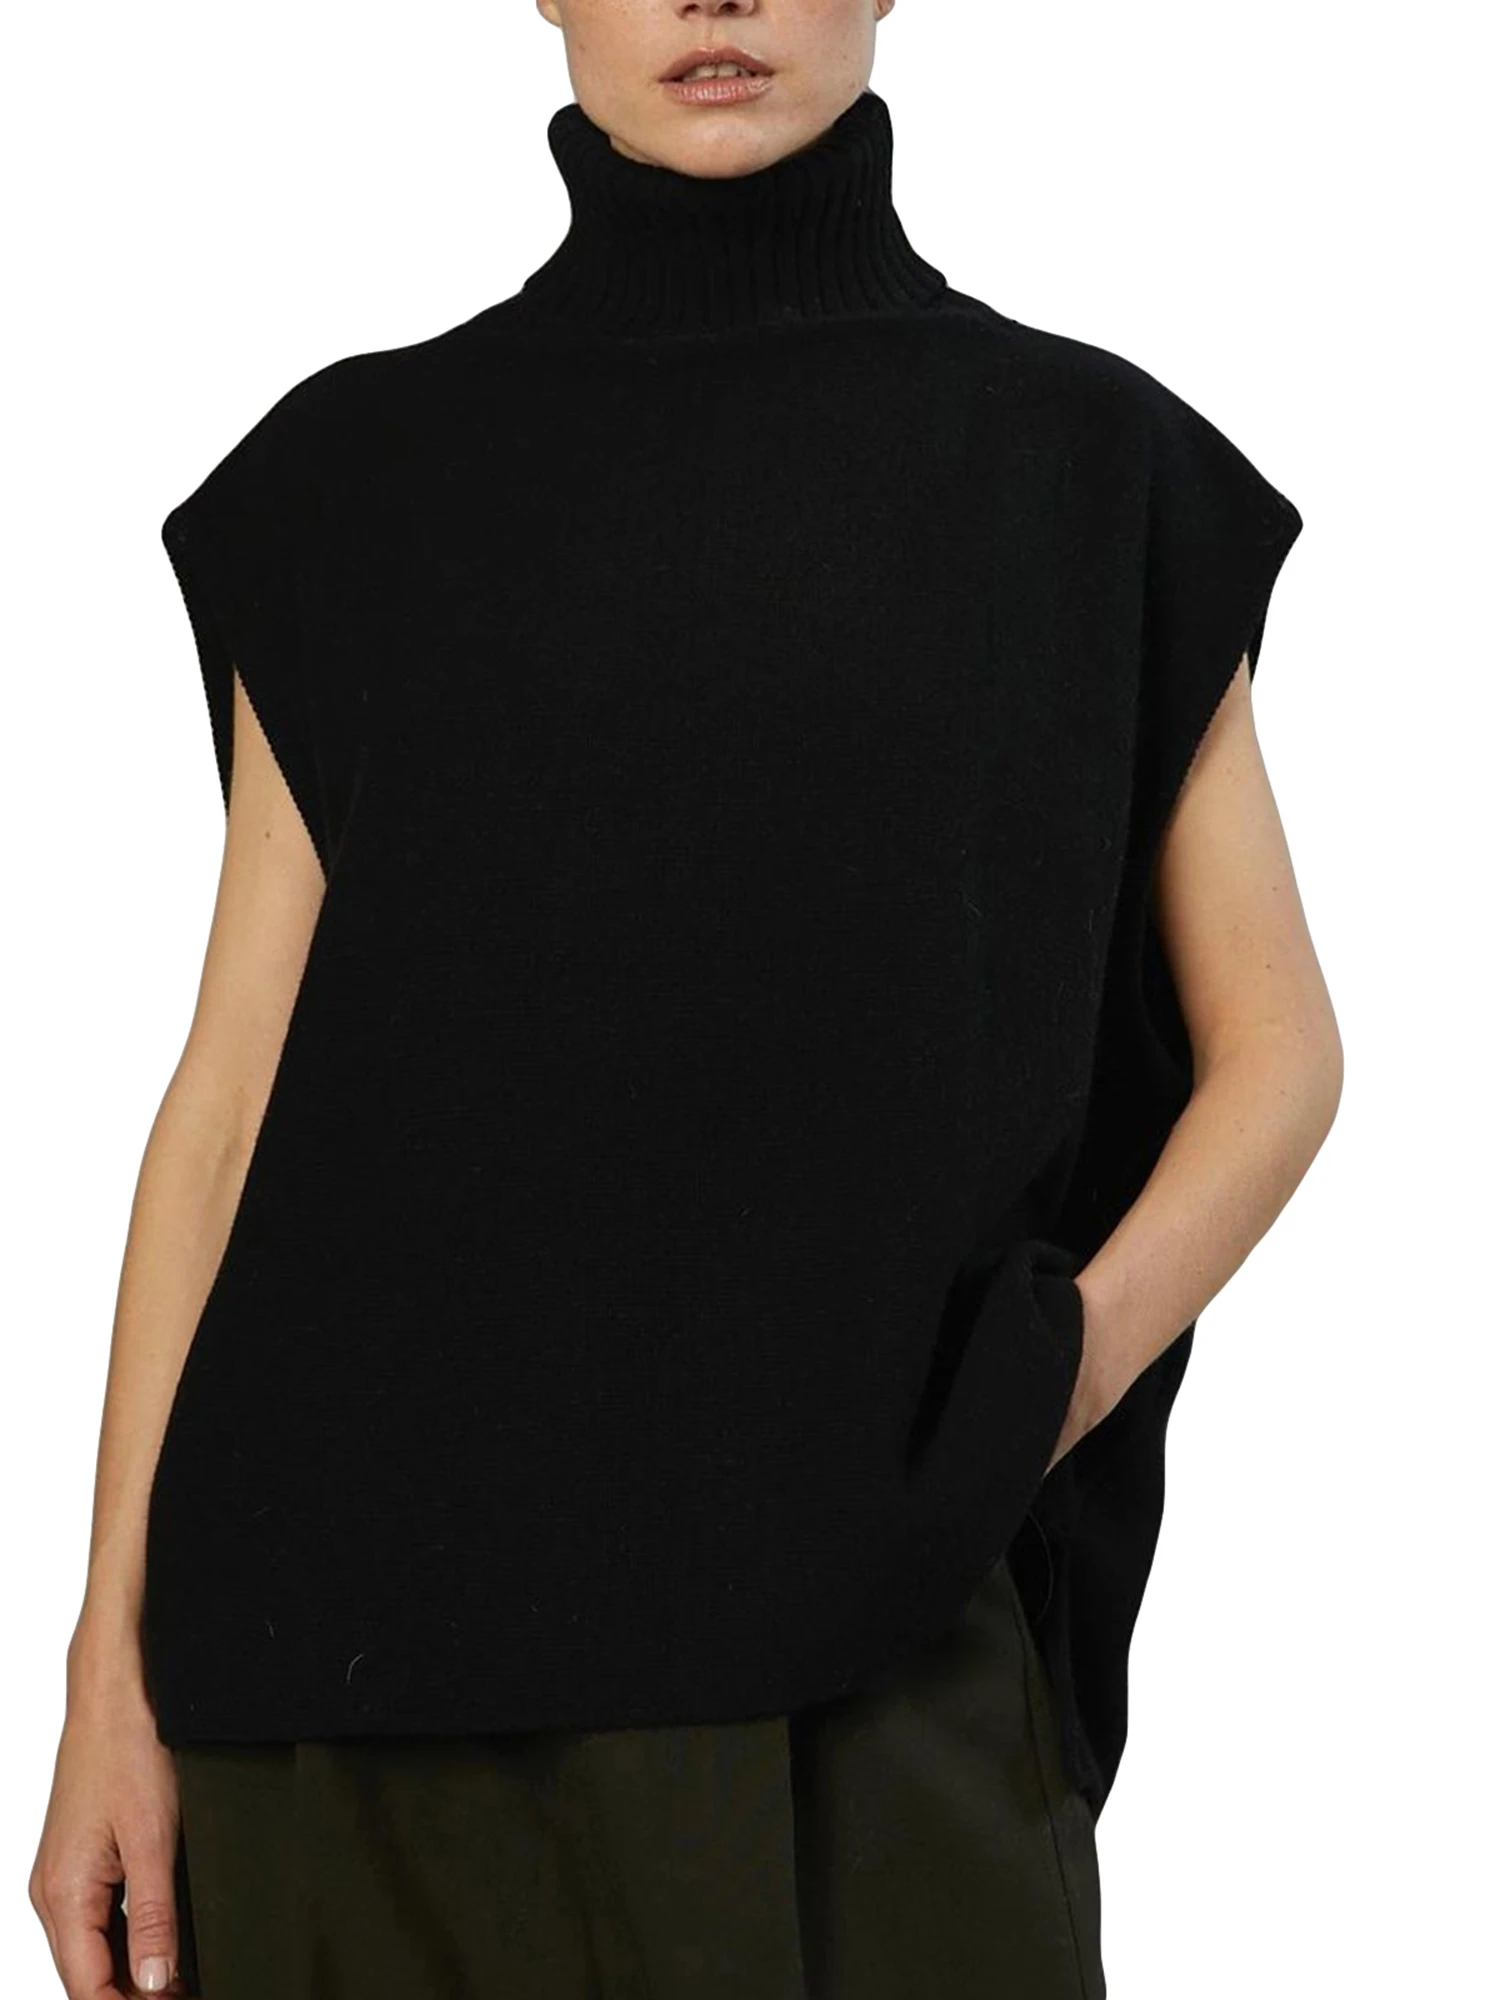 

Women s Sleeveless Knitted Sweater Vest with Ribbed High Neckline - Stylish Solid Color Knit Pullover Top for Casual and Going